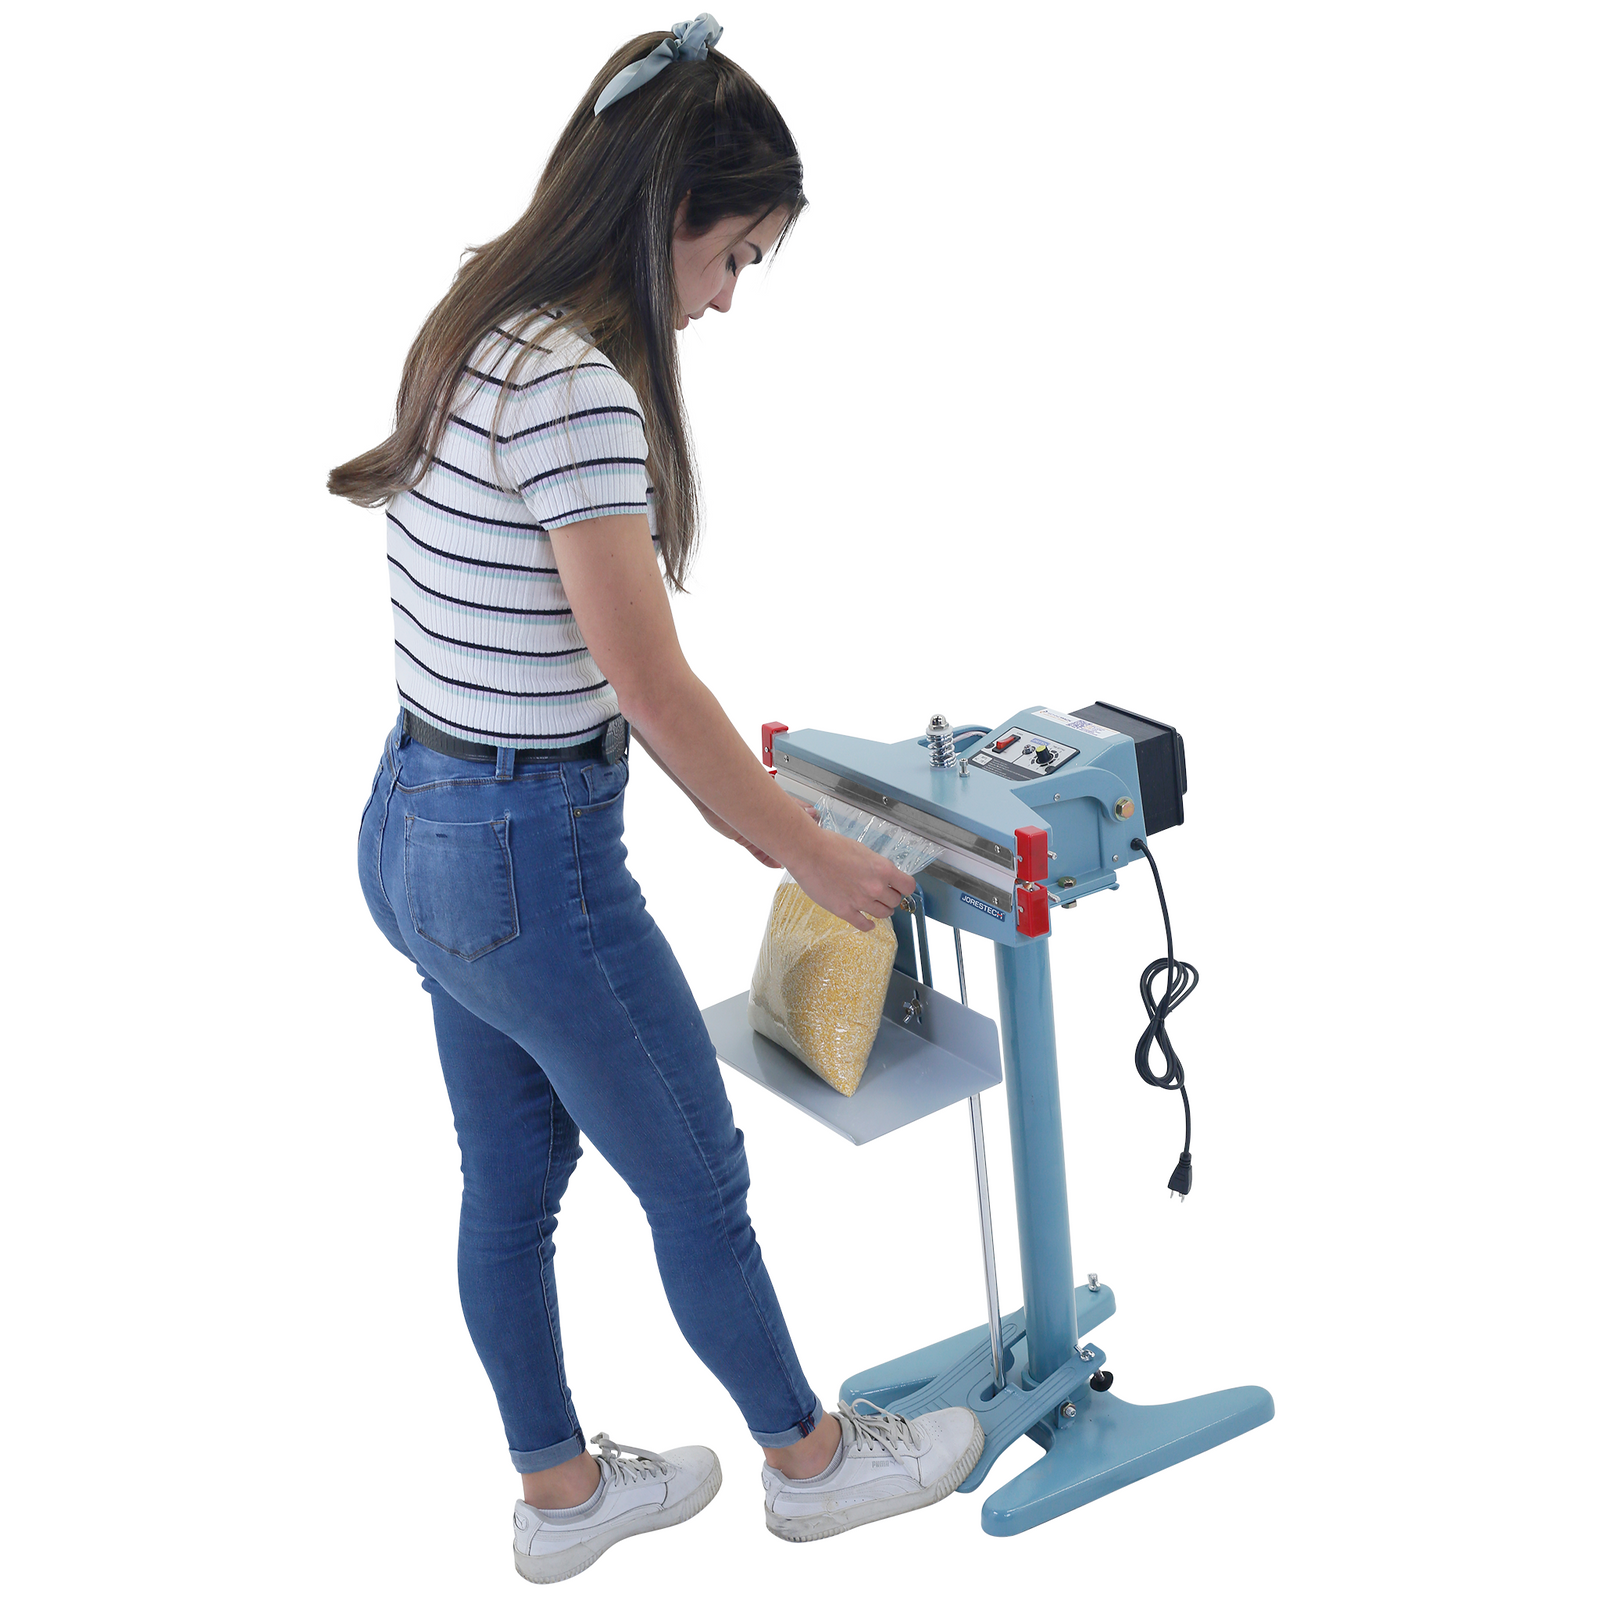 A woman pressing the foot pedal of the double heat impulse sealer to seal a large bag filled with corn